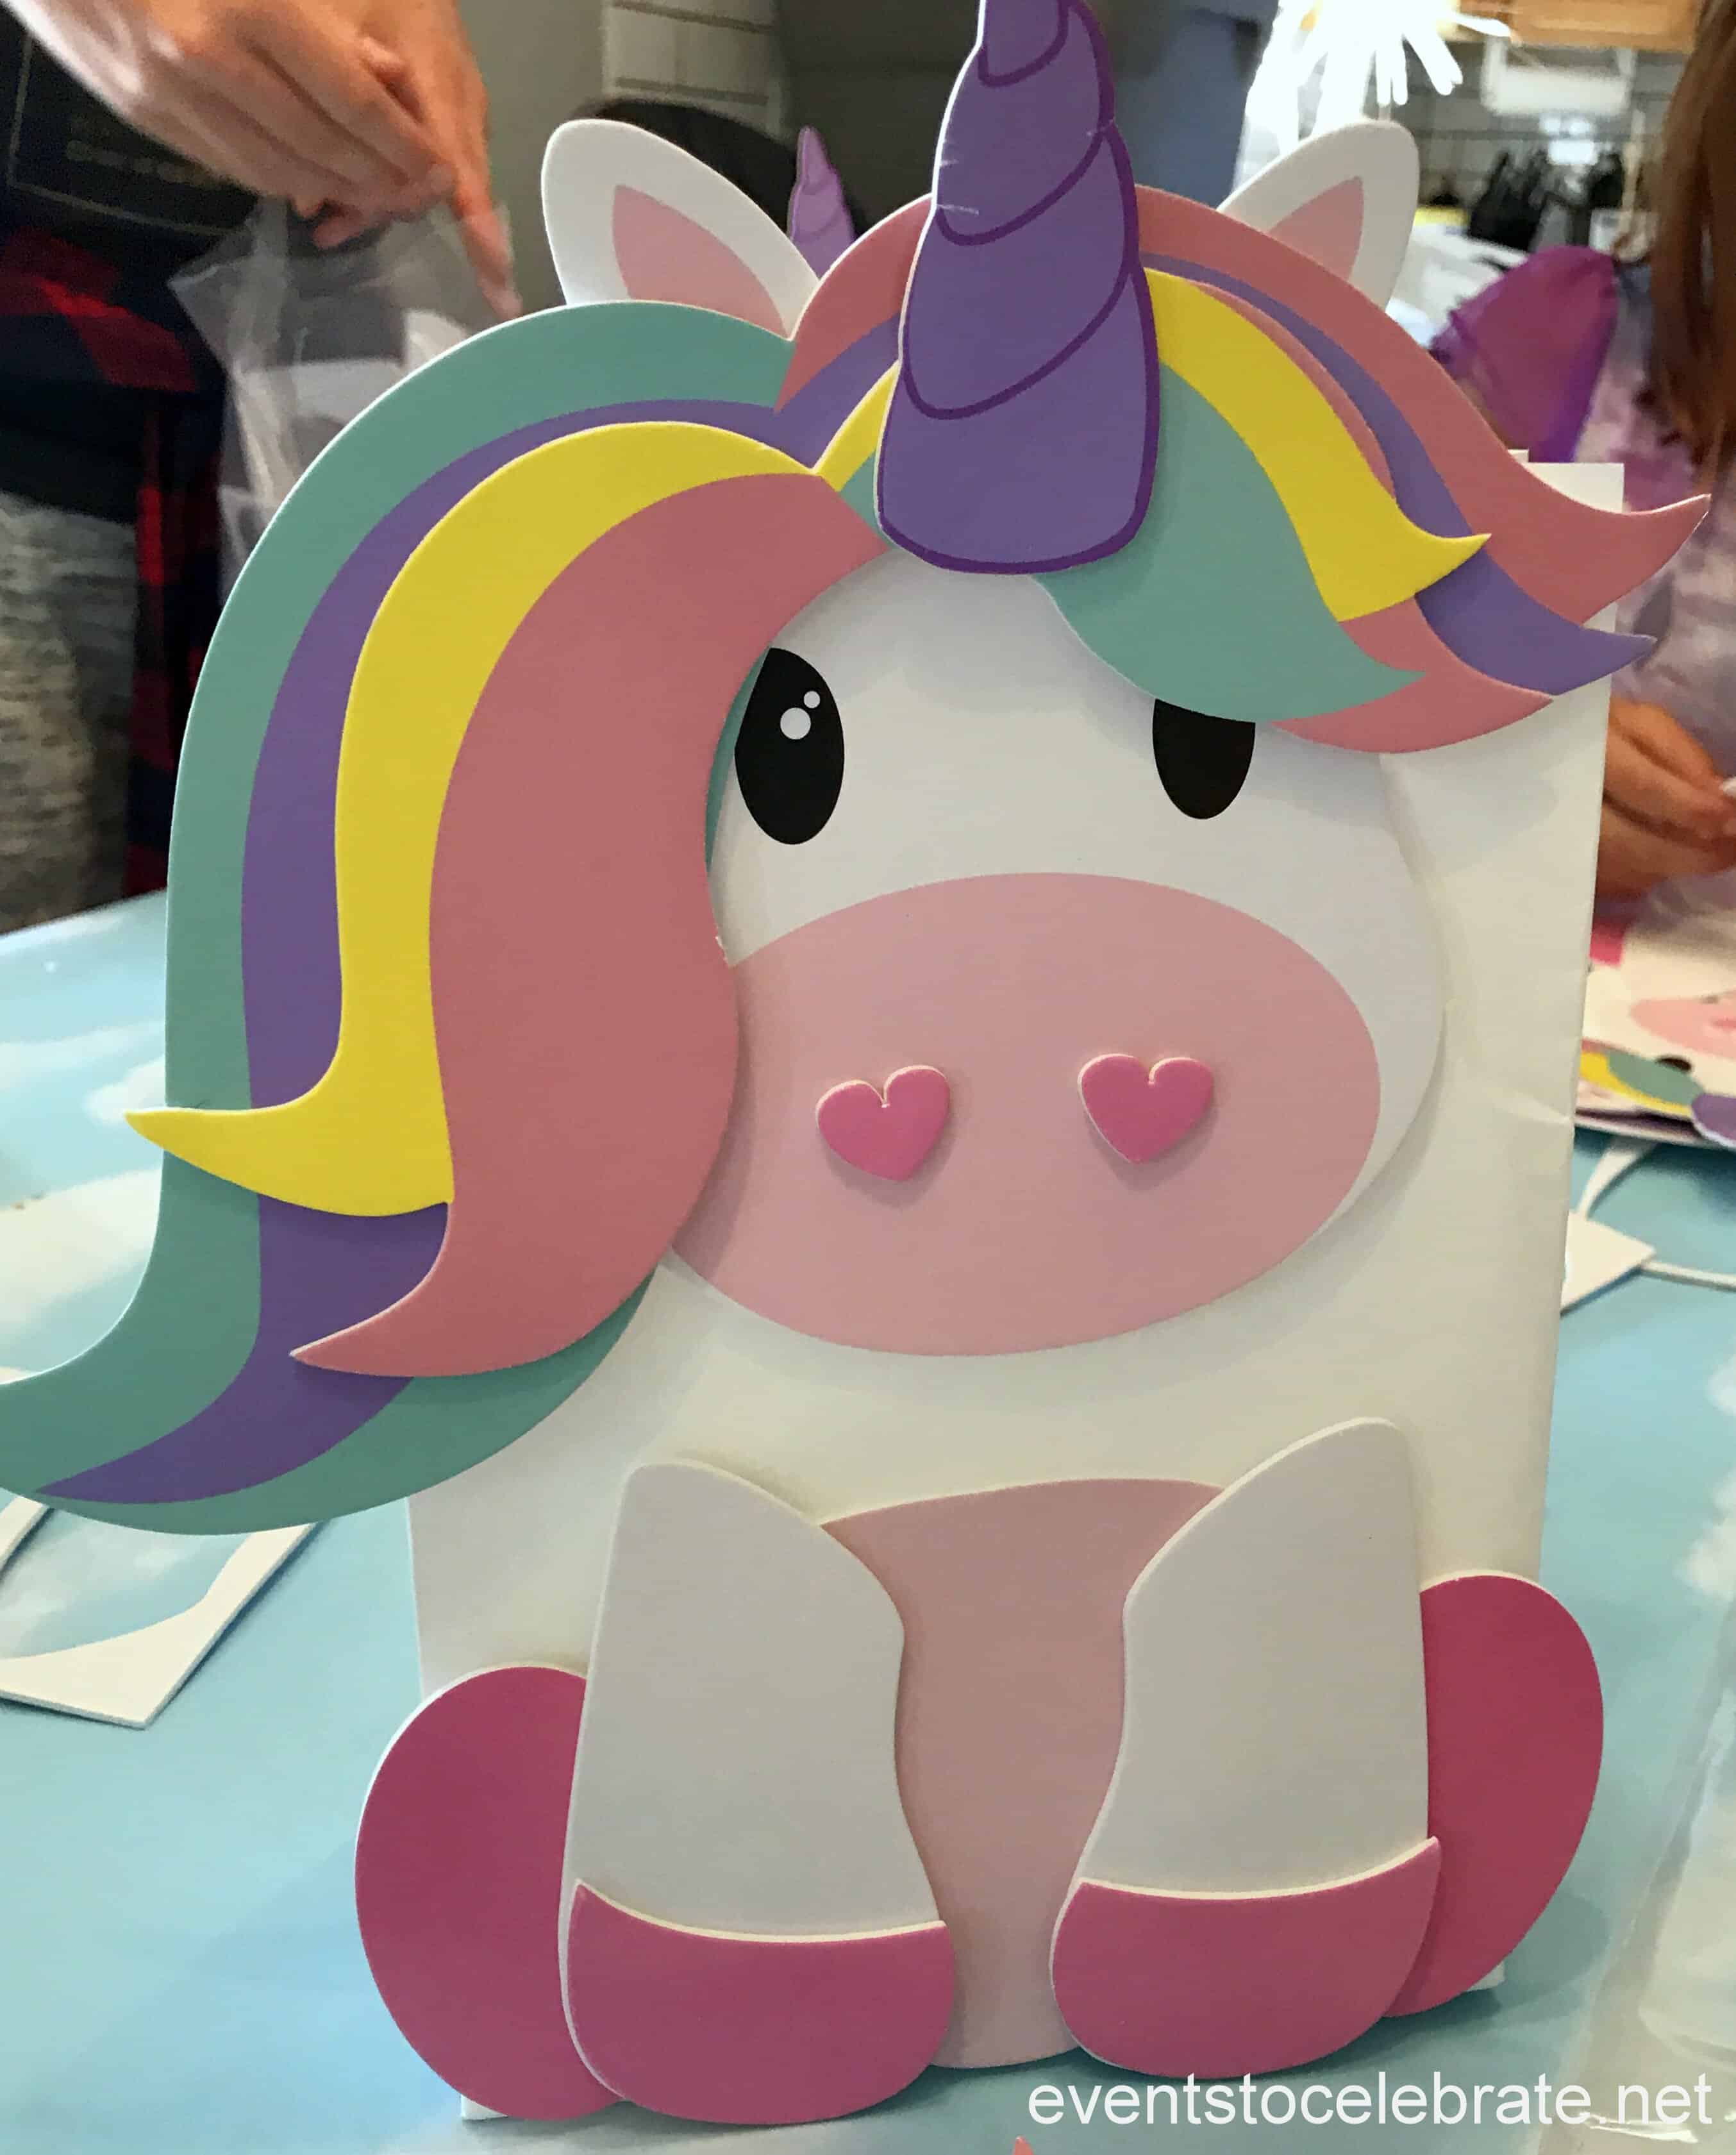 Unicorn Party Crafts and Activities - events to CELEBRATE!